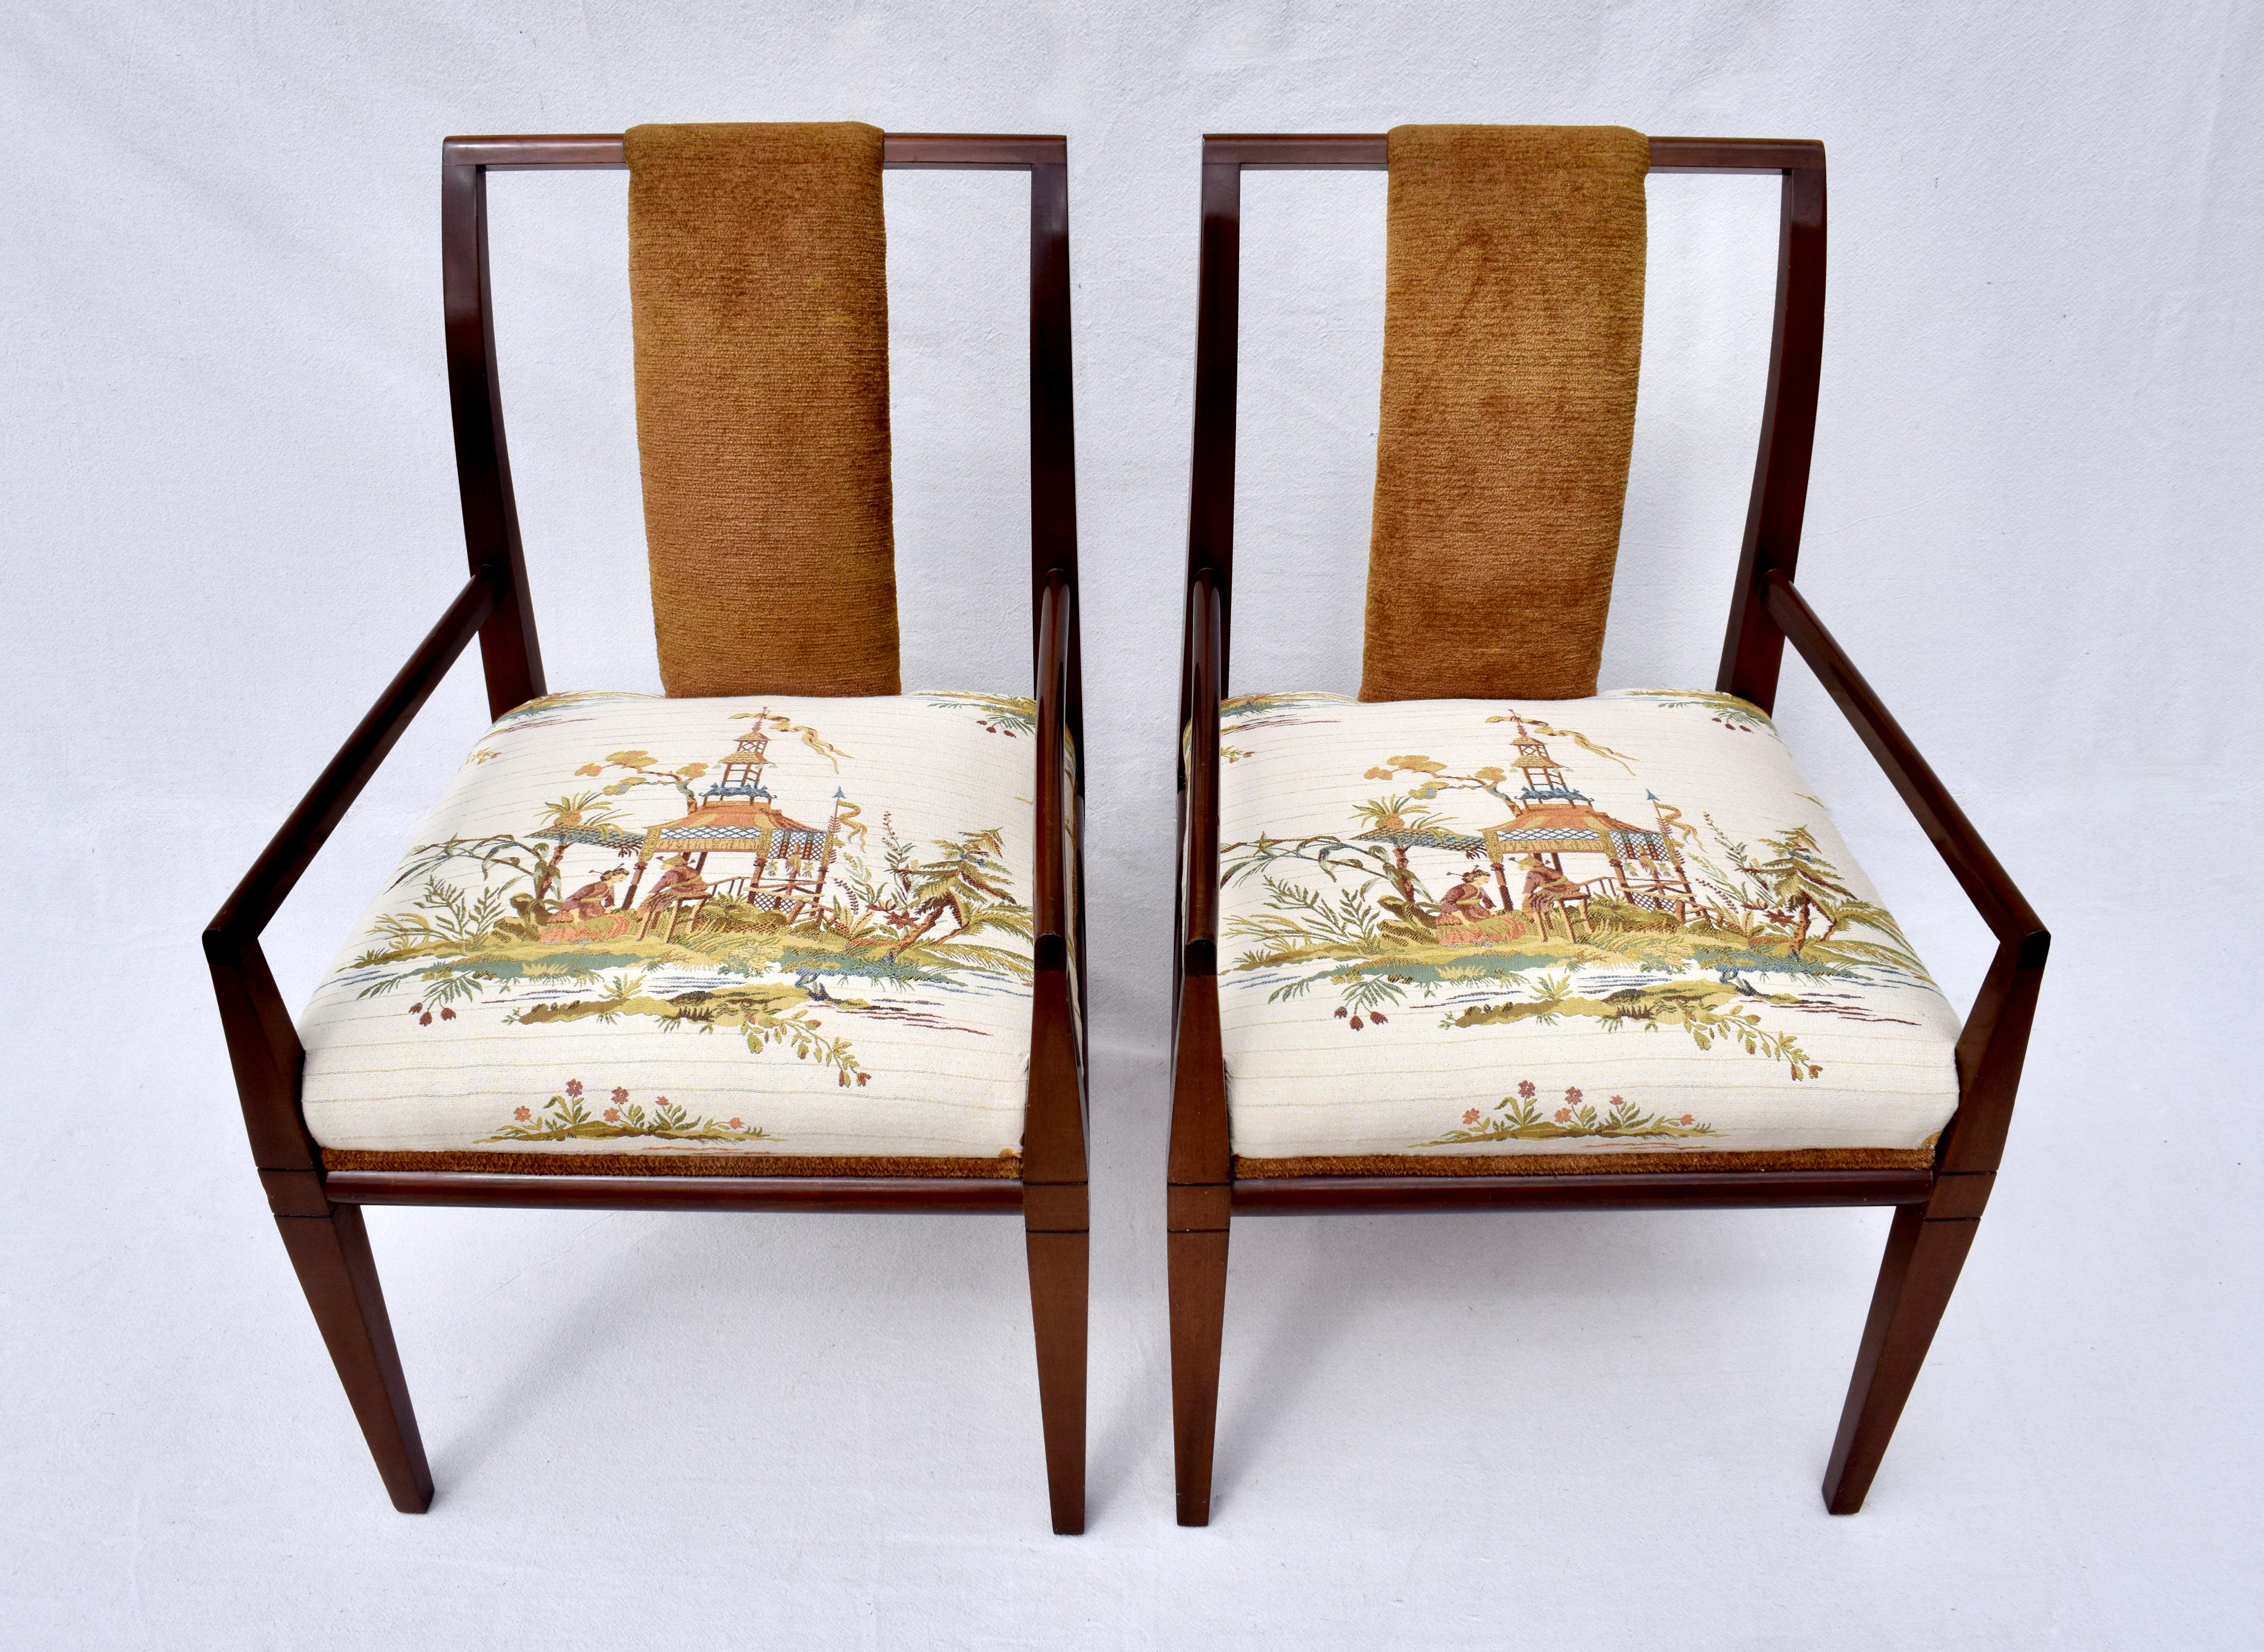 Set of 6 Mahogany dining chairs for Parzinger Originals newly upholstered in Brunschwig & Fils woven Chinoiserie fabric. Circa 1950's in excellent vintage condition; ready for use.
Captain Chair dimensions: Two @ 22